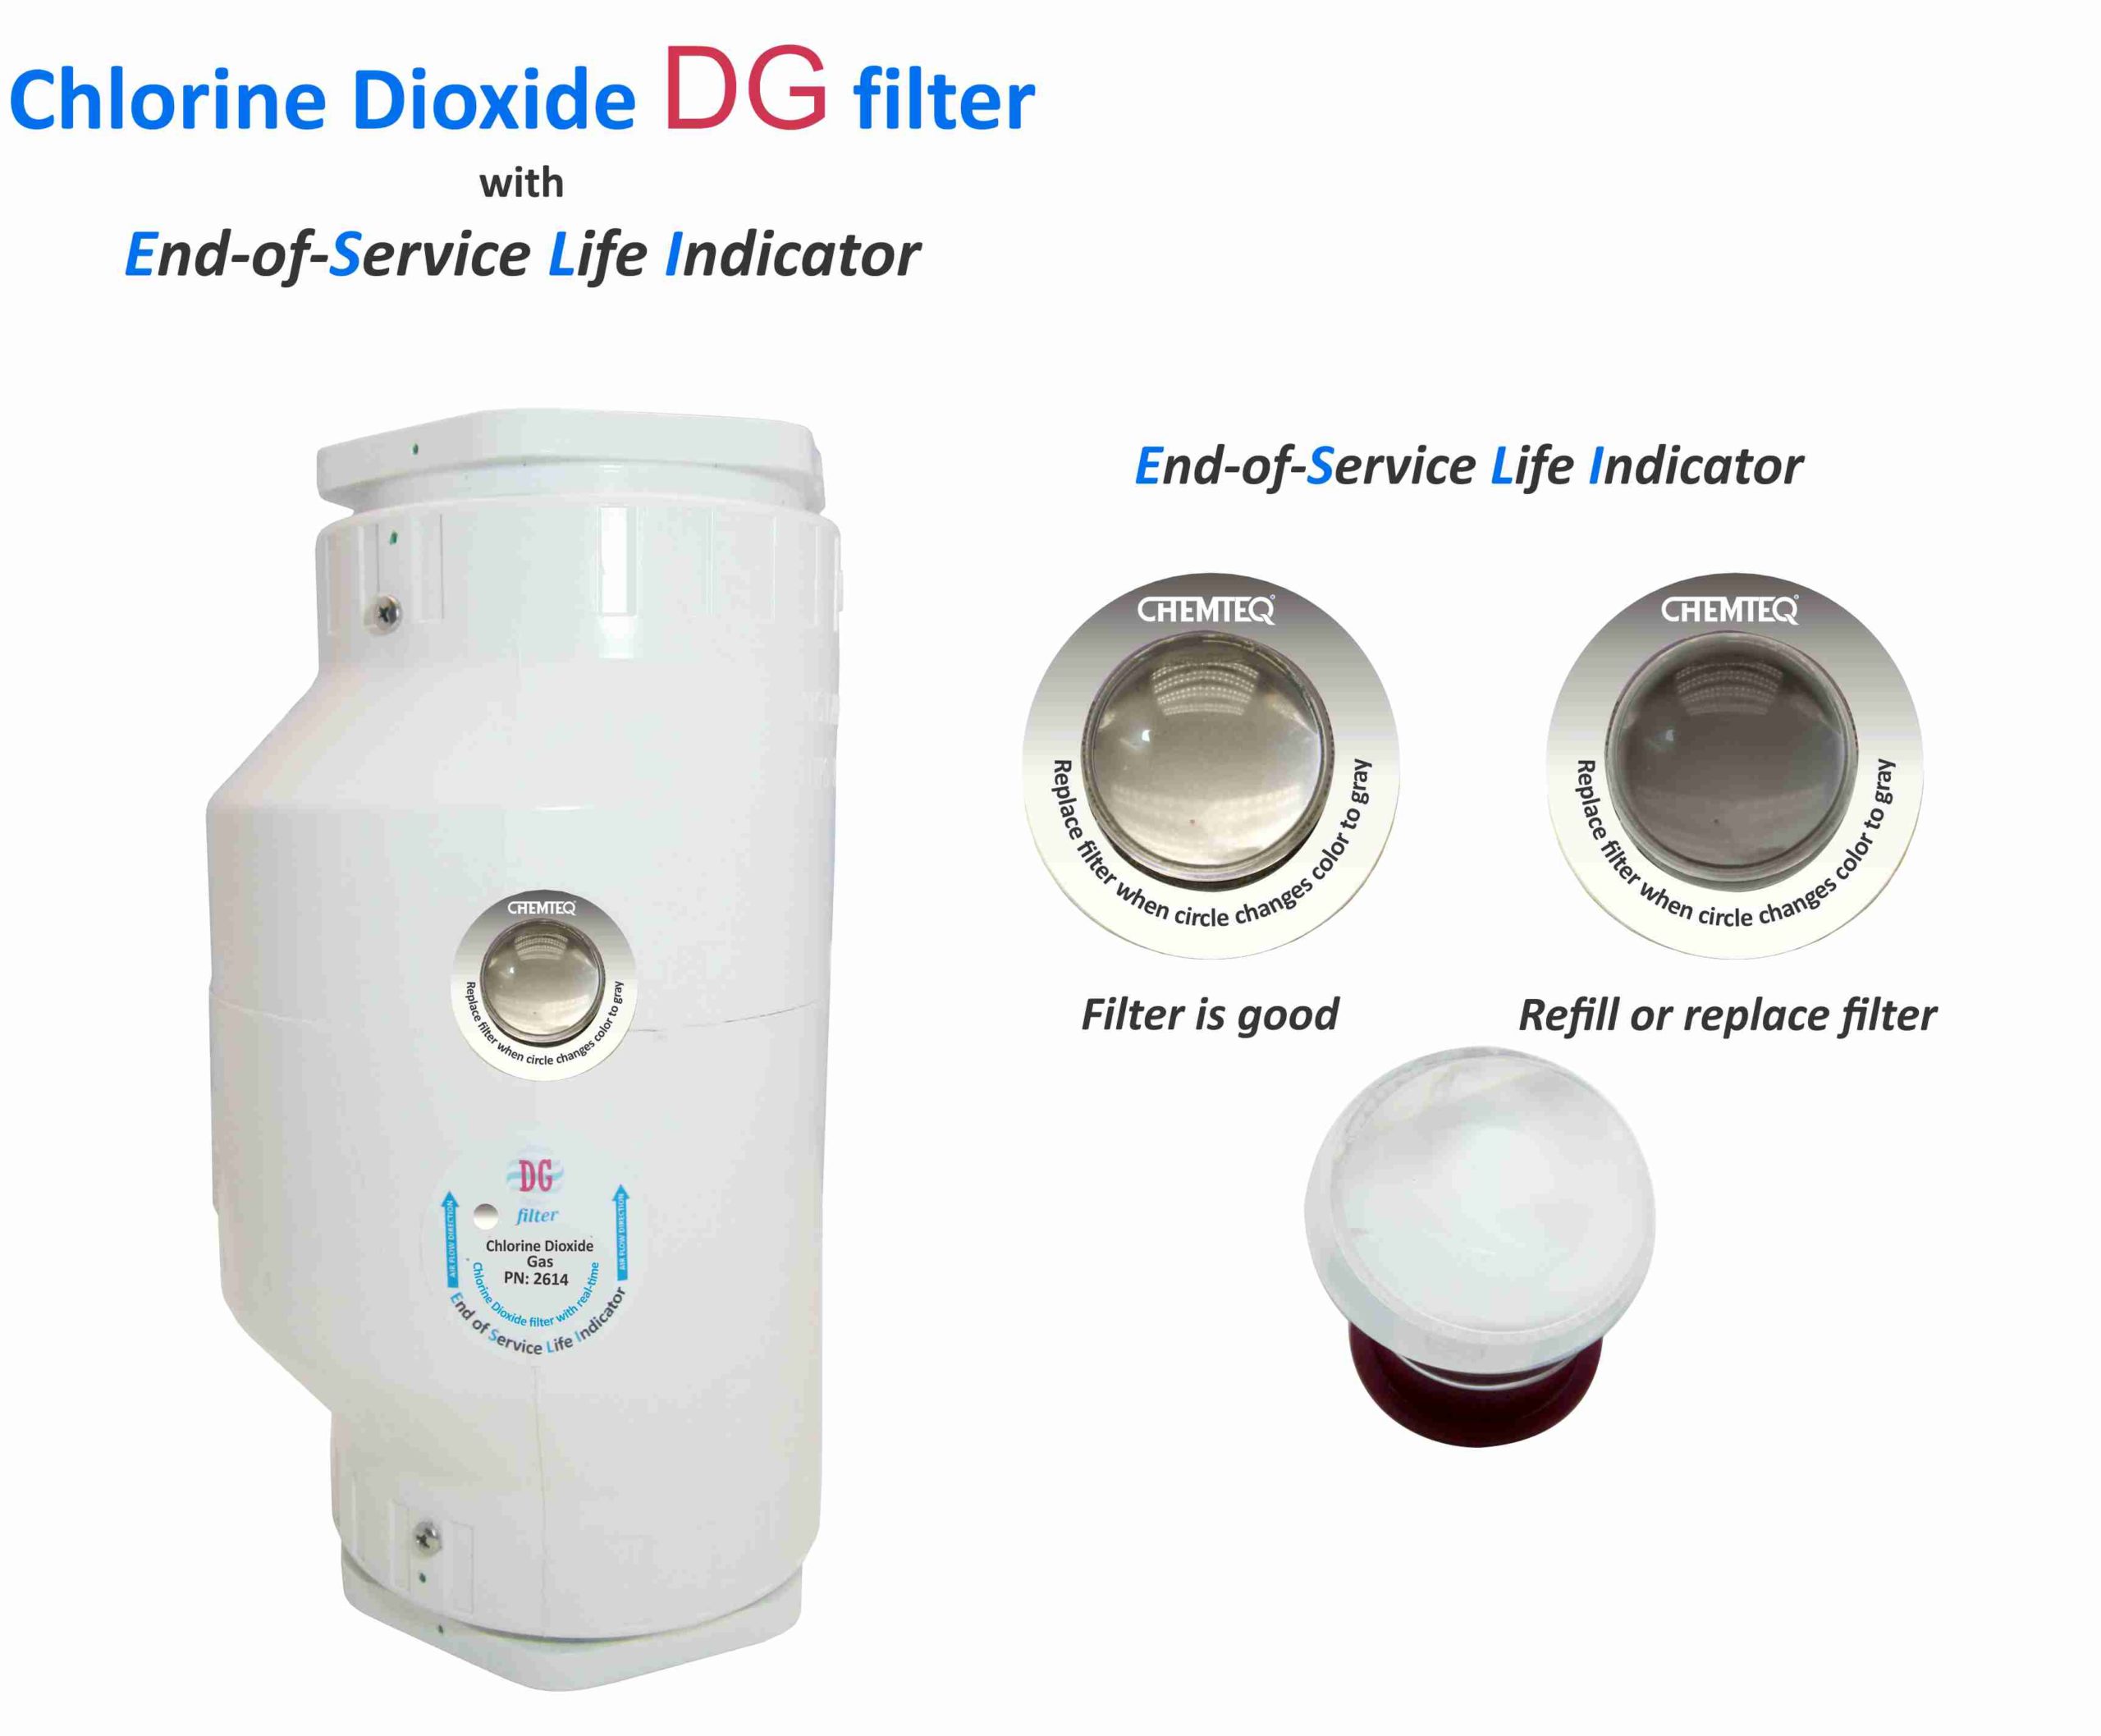 Chlorine Dioxide DG FILTER-ESLI-2614. Filter with end of service life indicator for chemical processes and reactor vents.